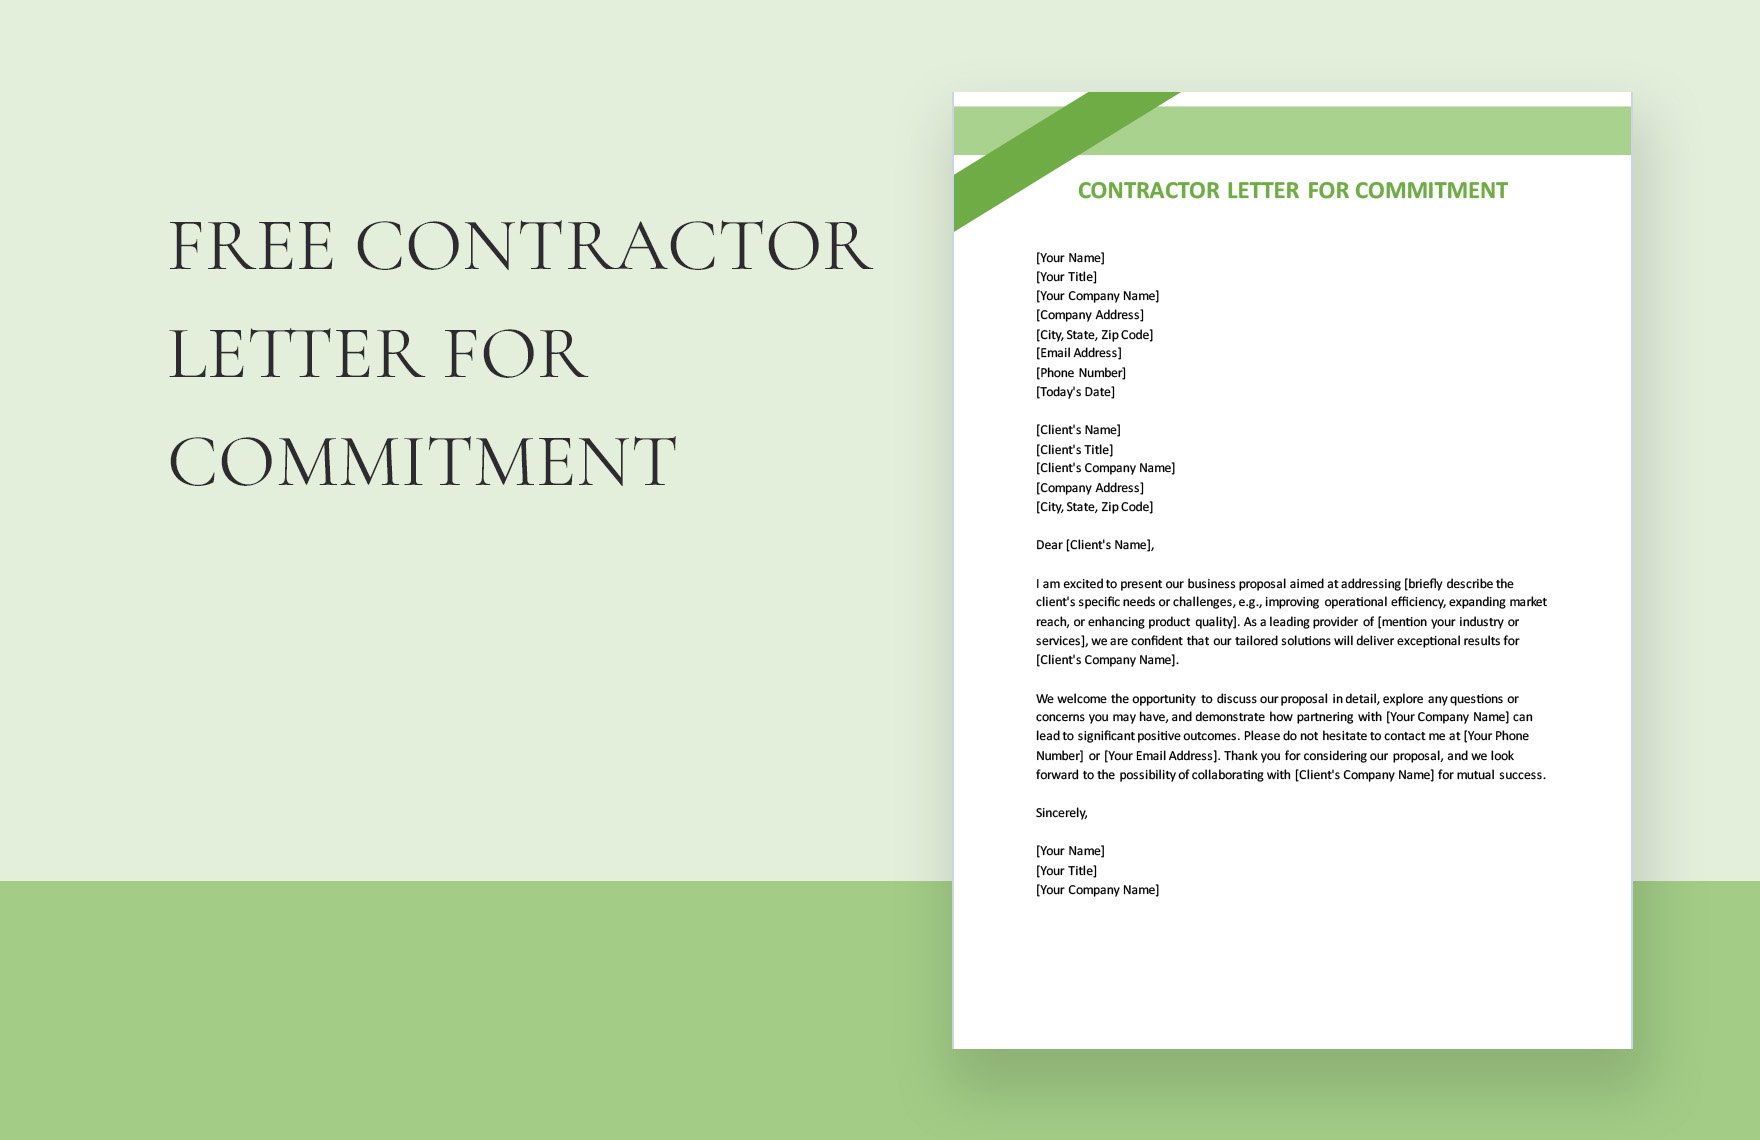 Free Contractor Letter Of Commitment Download in Word, Google Docs